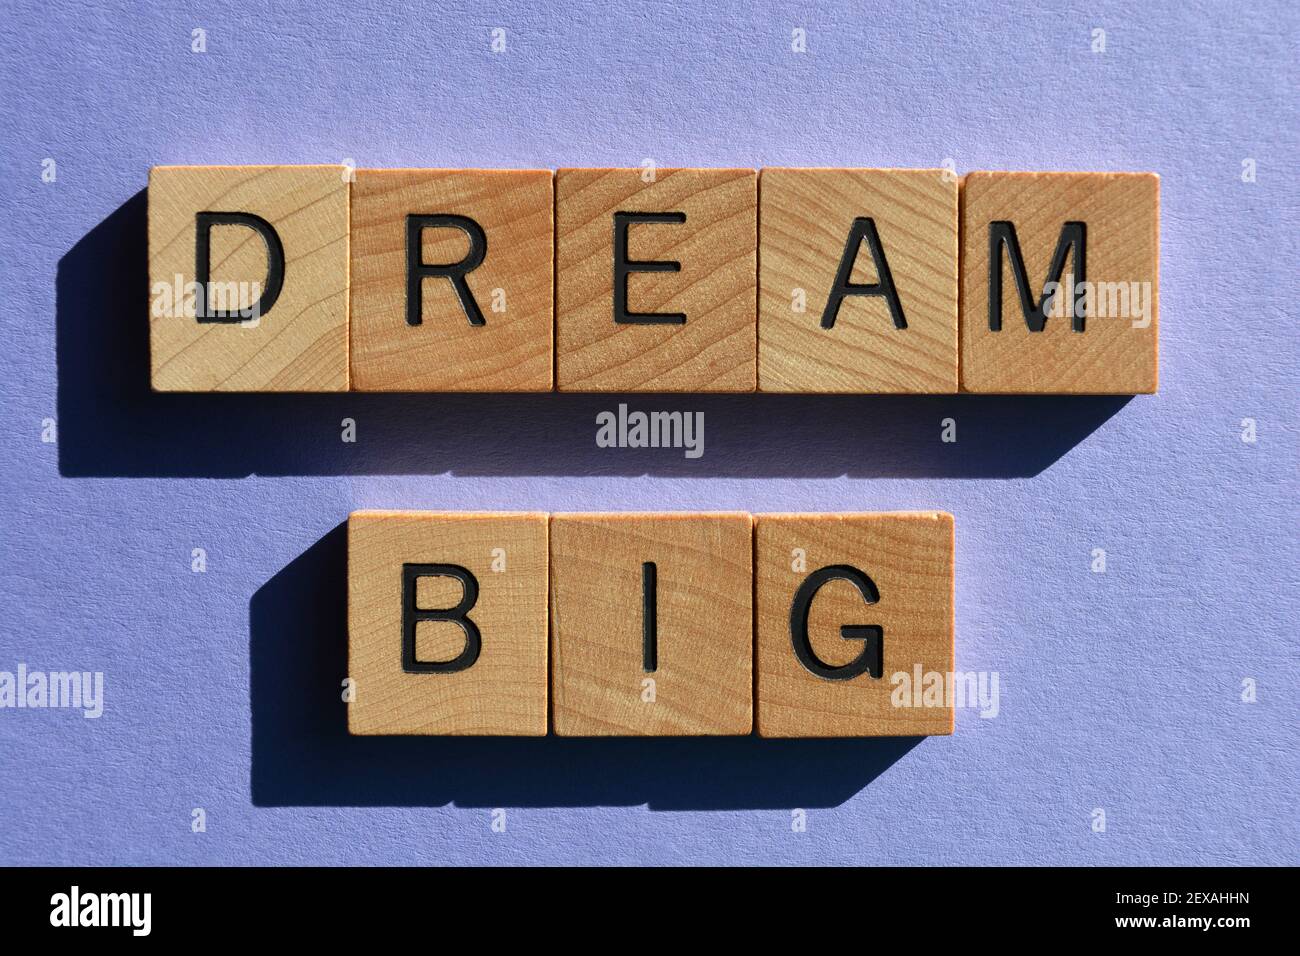 My Dreams Dream Wooden Letters On Stock Photo 545549434